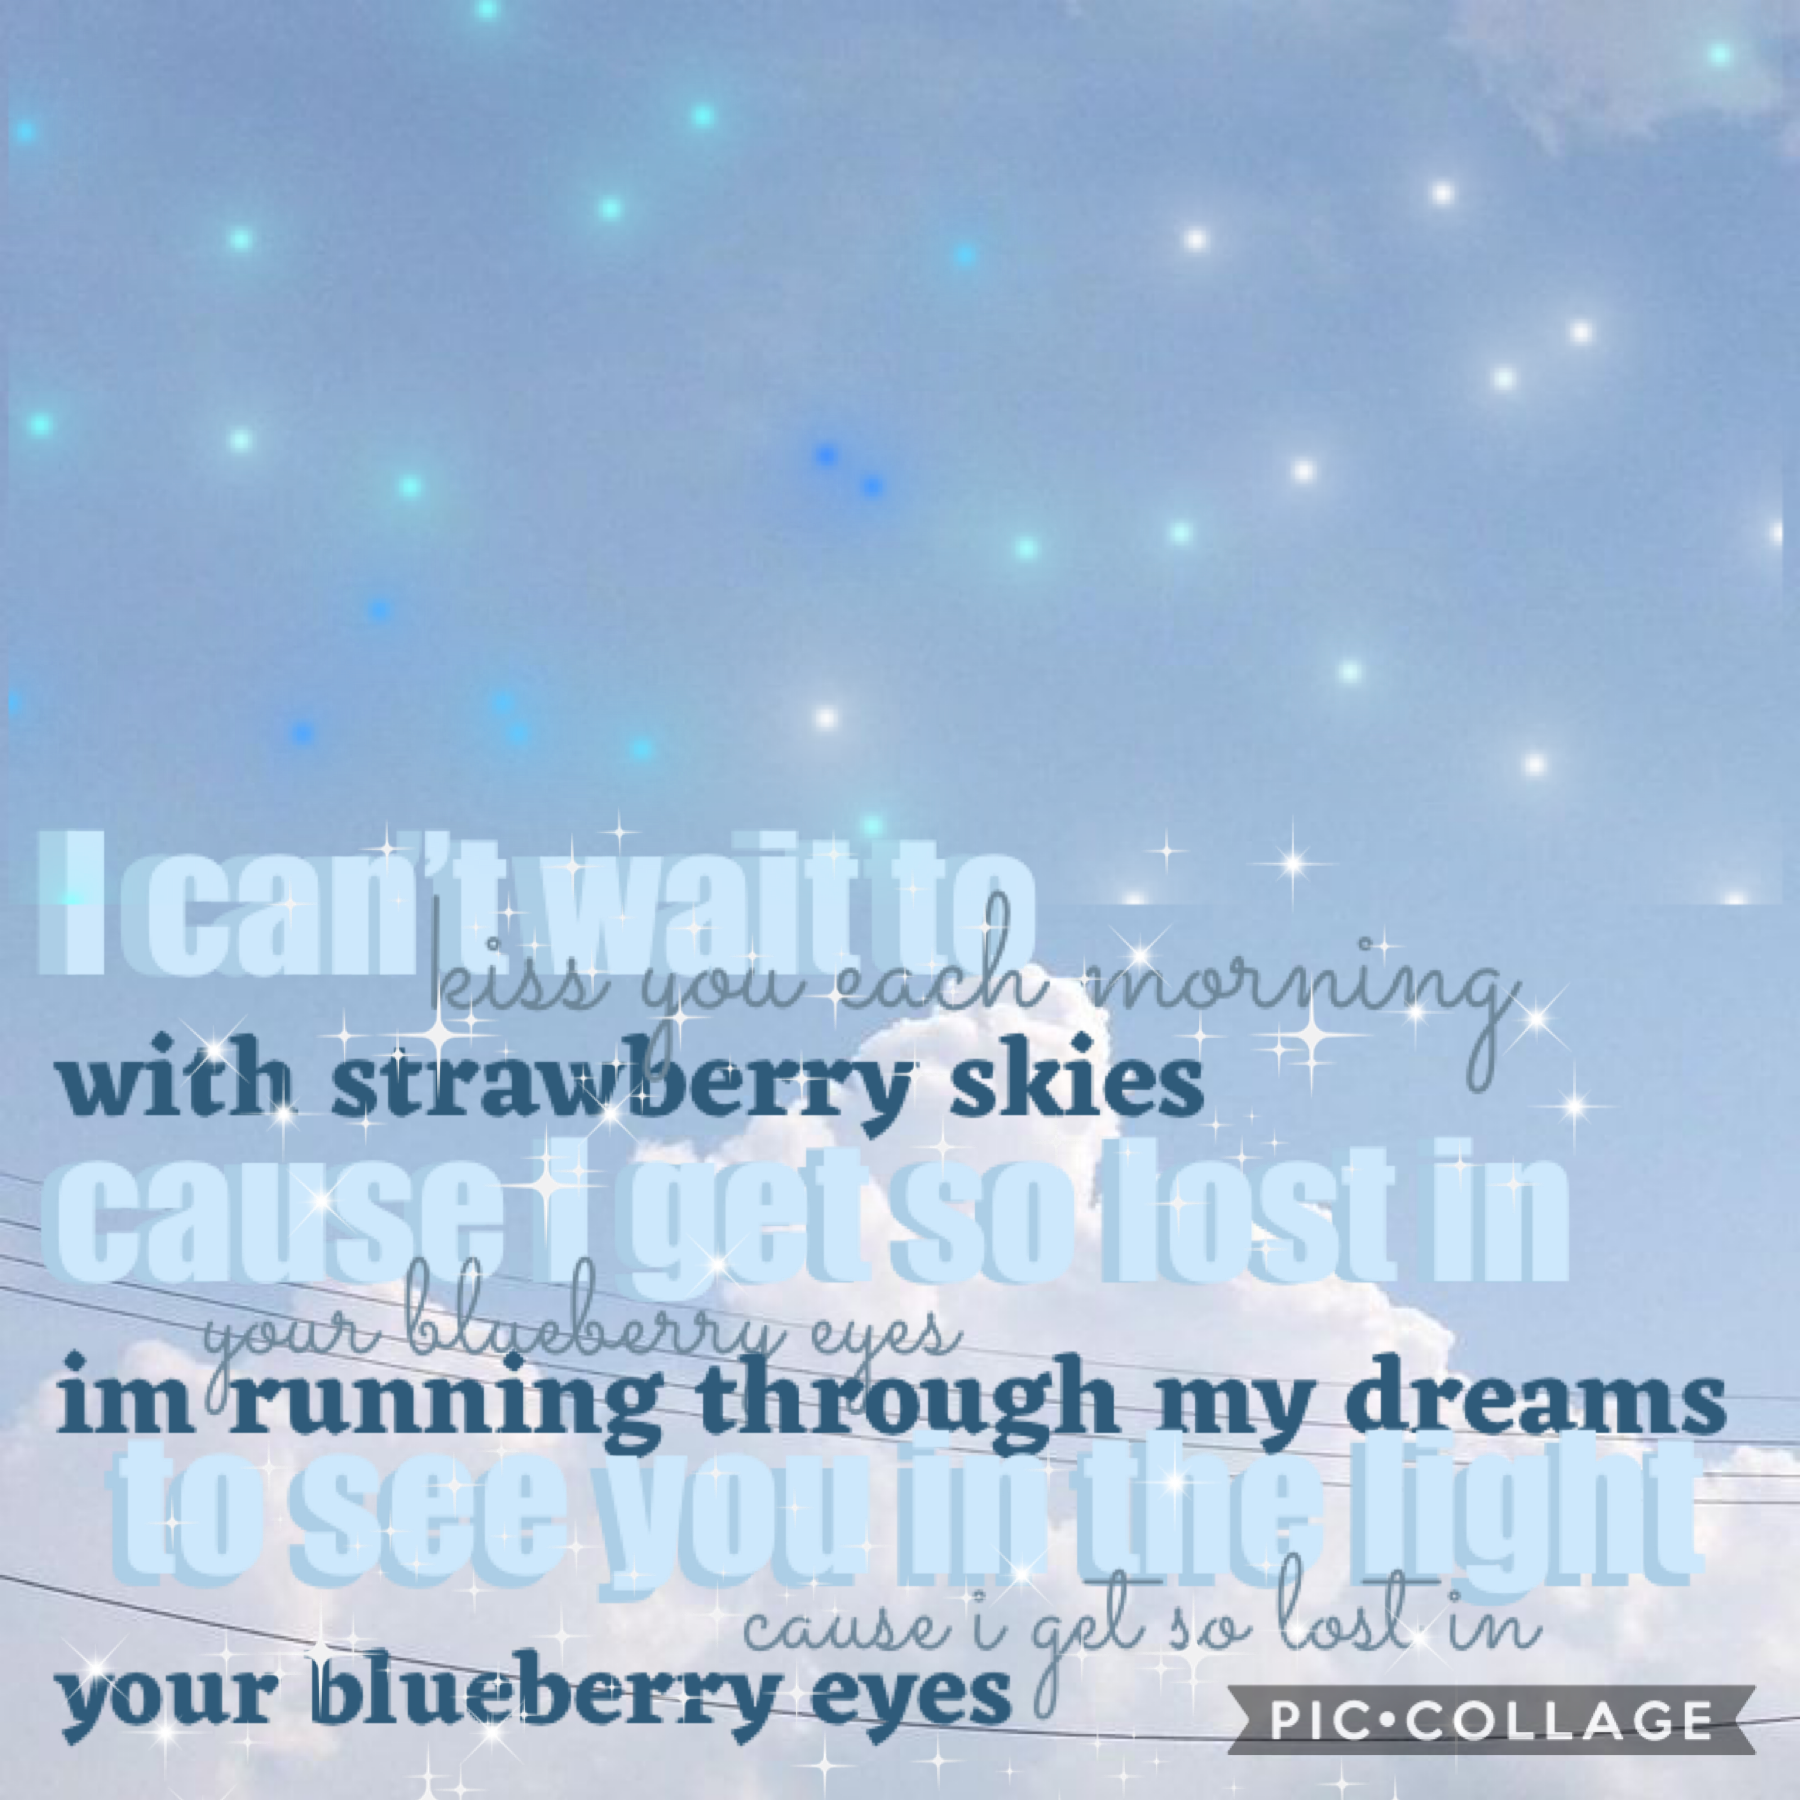 🧵tap💍
hey! I’m back! 
listen to “blueberry eyes” by MAX